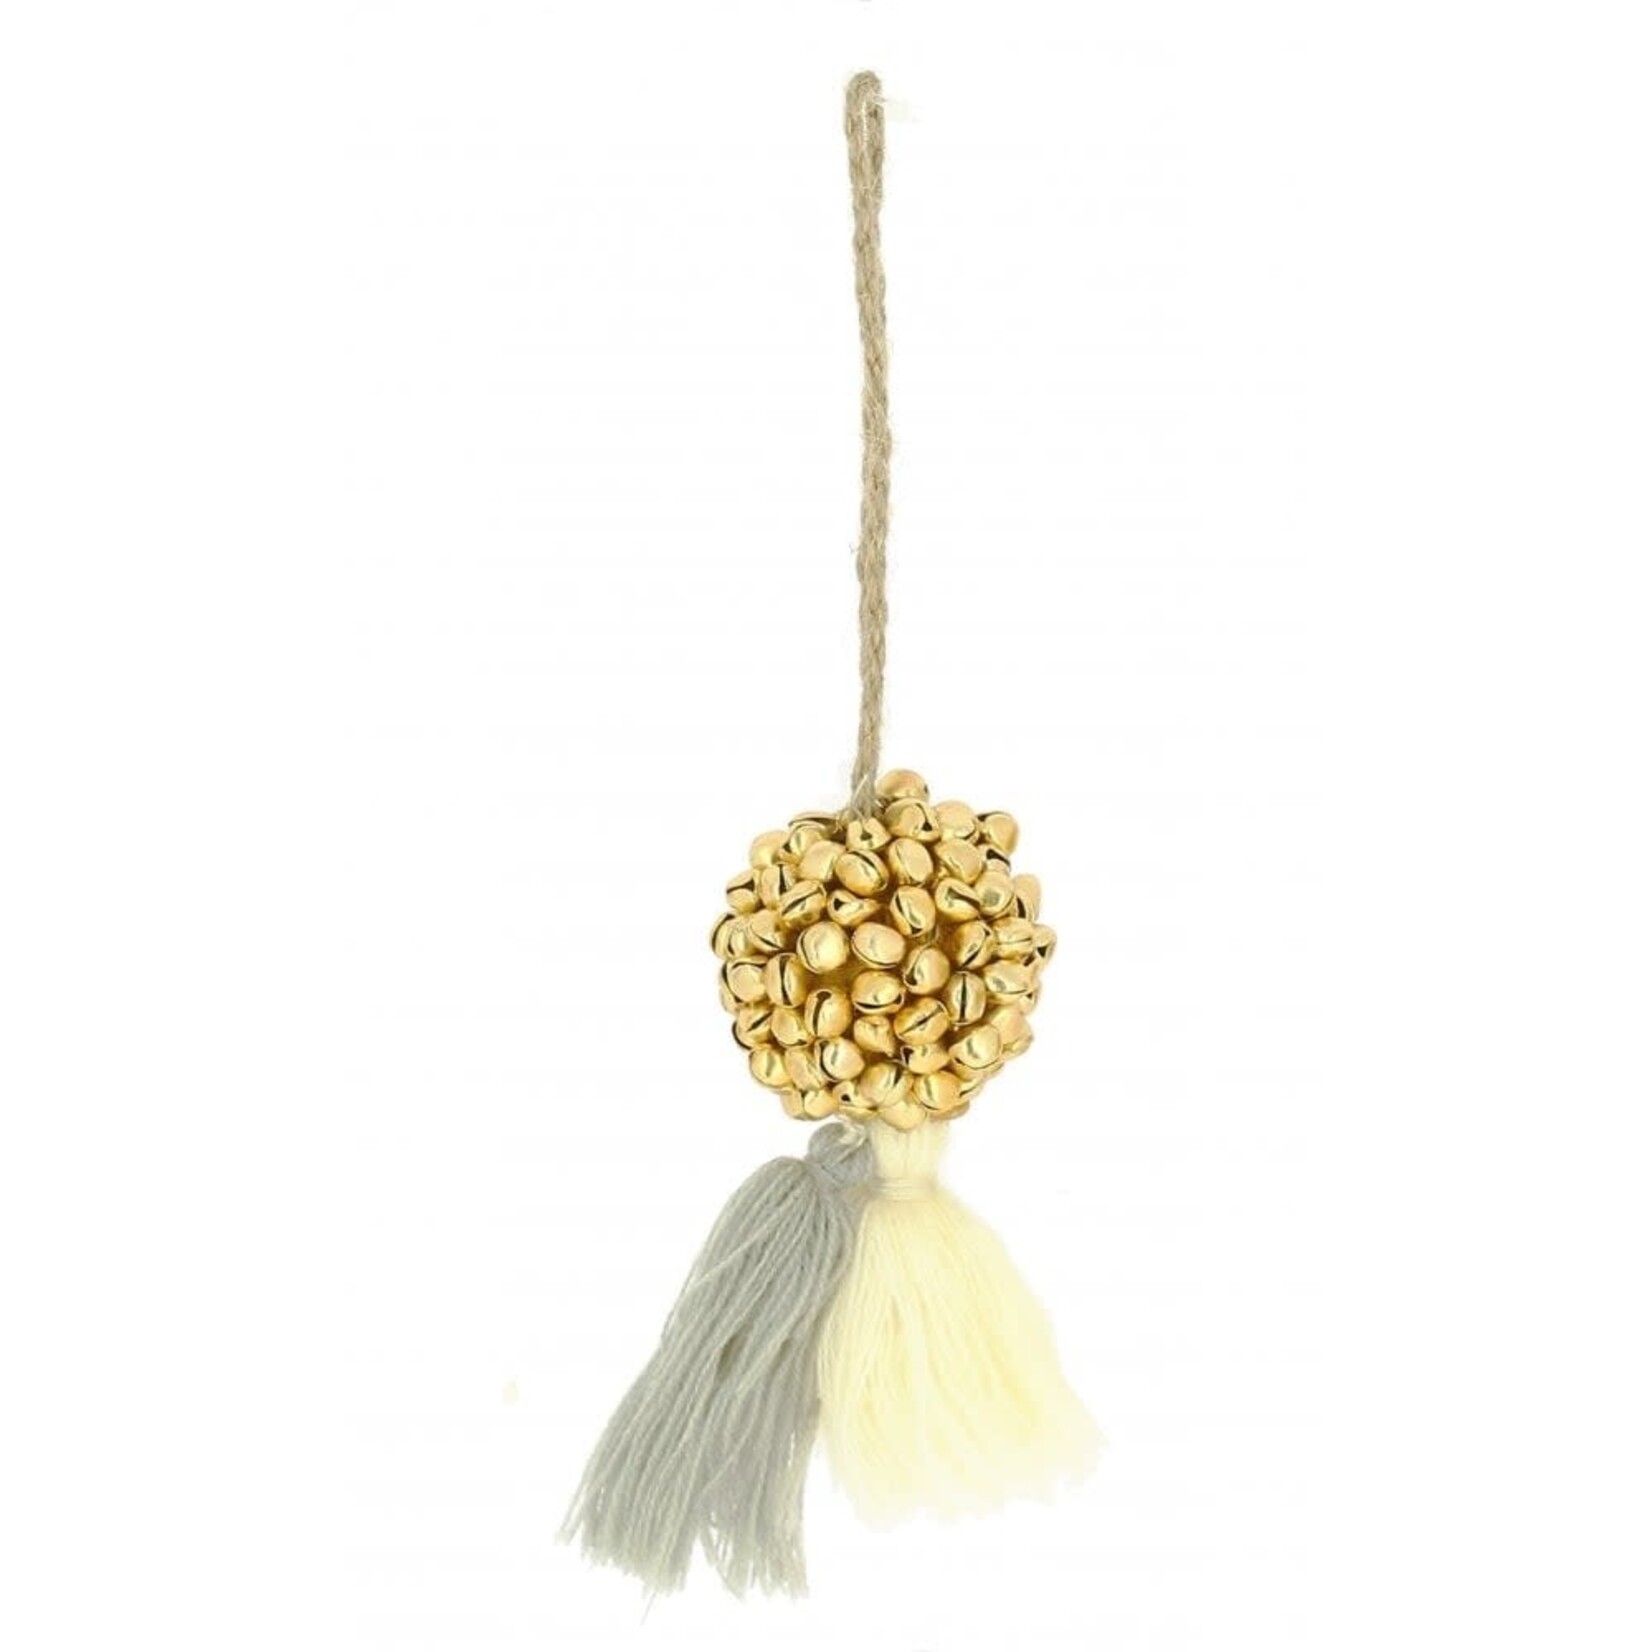 Fiona Walker Fiona Walker Pastel Mini Gold Bell 6cm Bauble with Cream and Grey Tassel